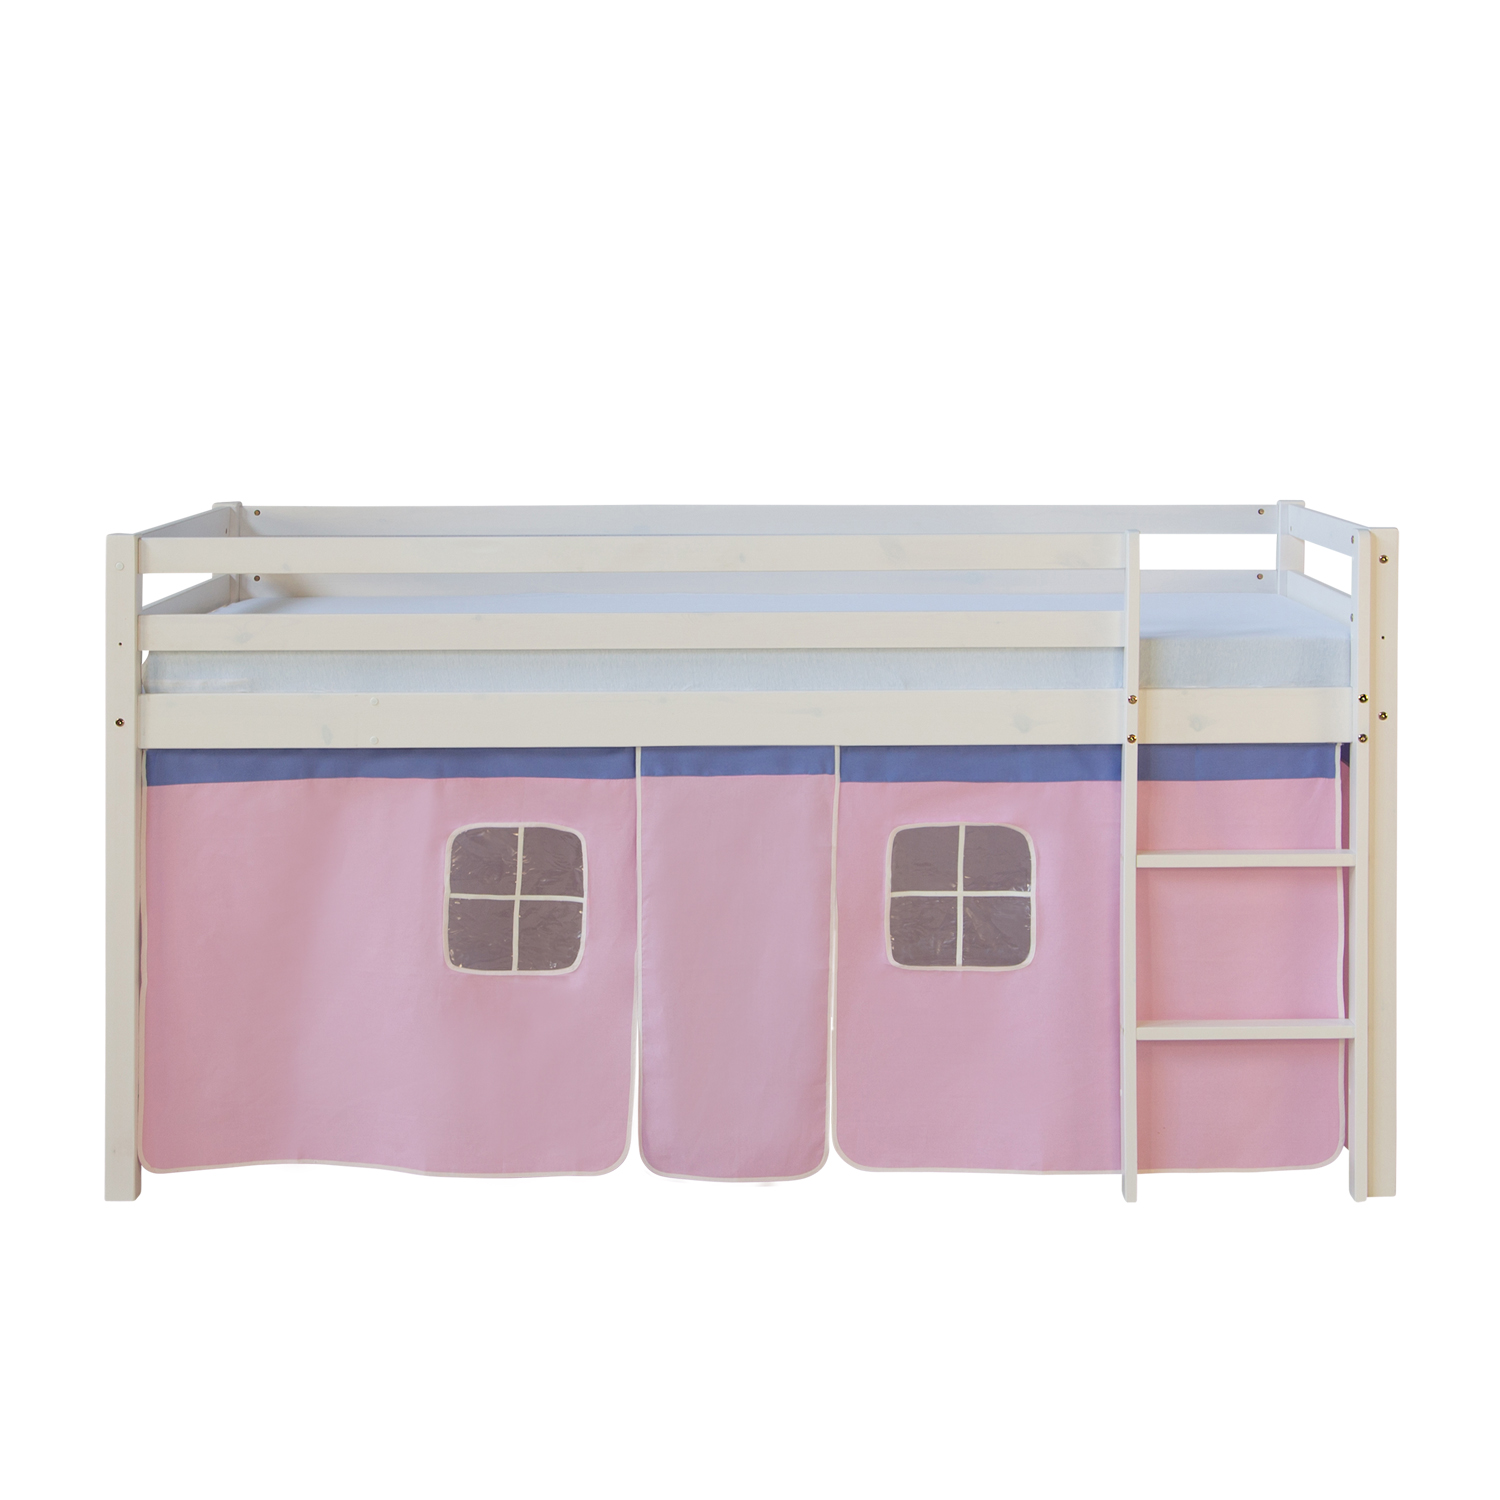 Loftbed 90x200 cm with Slats Bunk bed Childrens bed Solid Pine Wood Curtain Pink